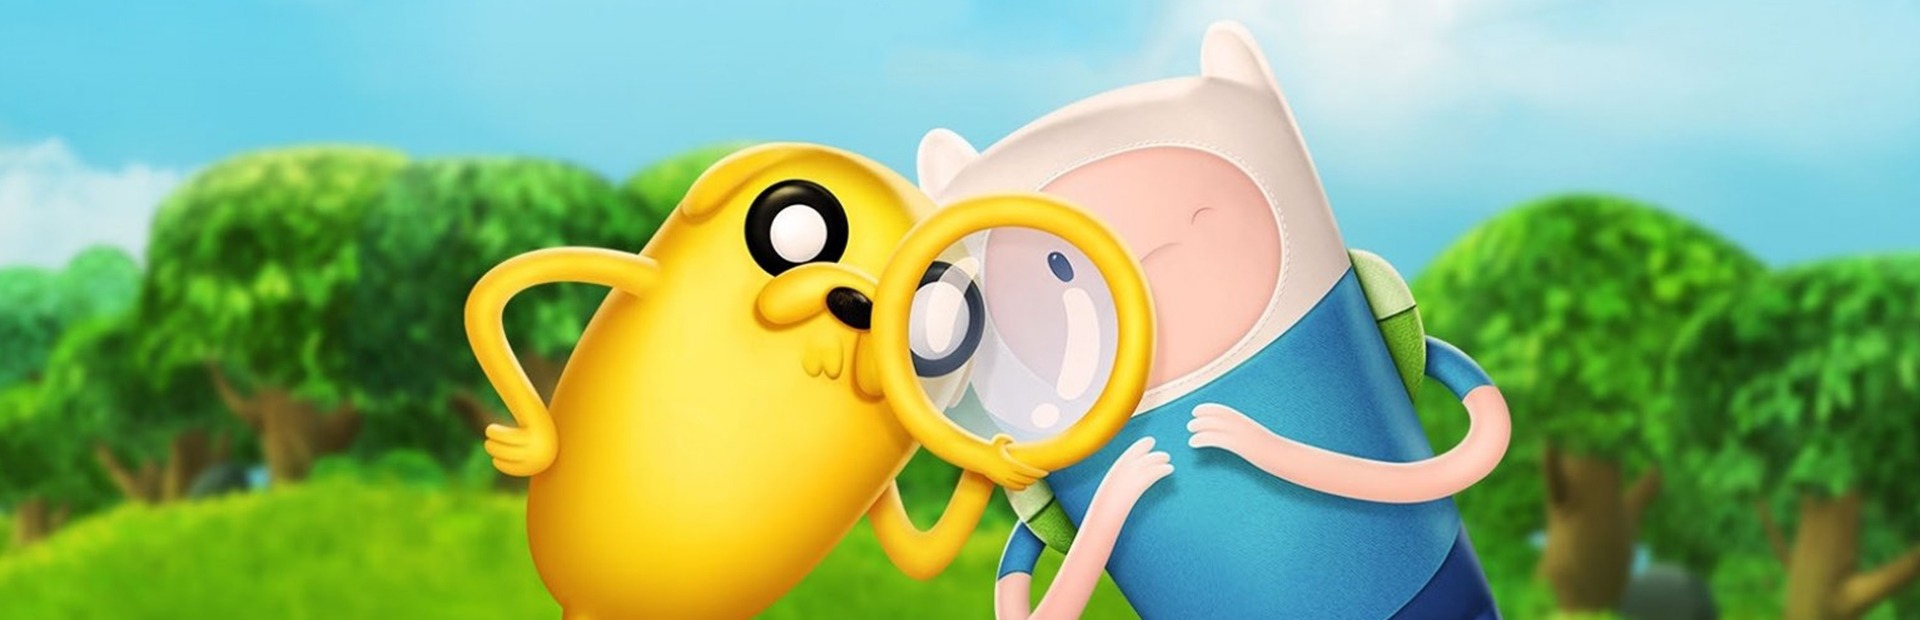 Adventure time finn and jake investigations steam фото 23